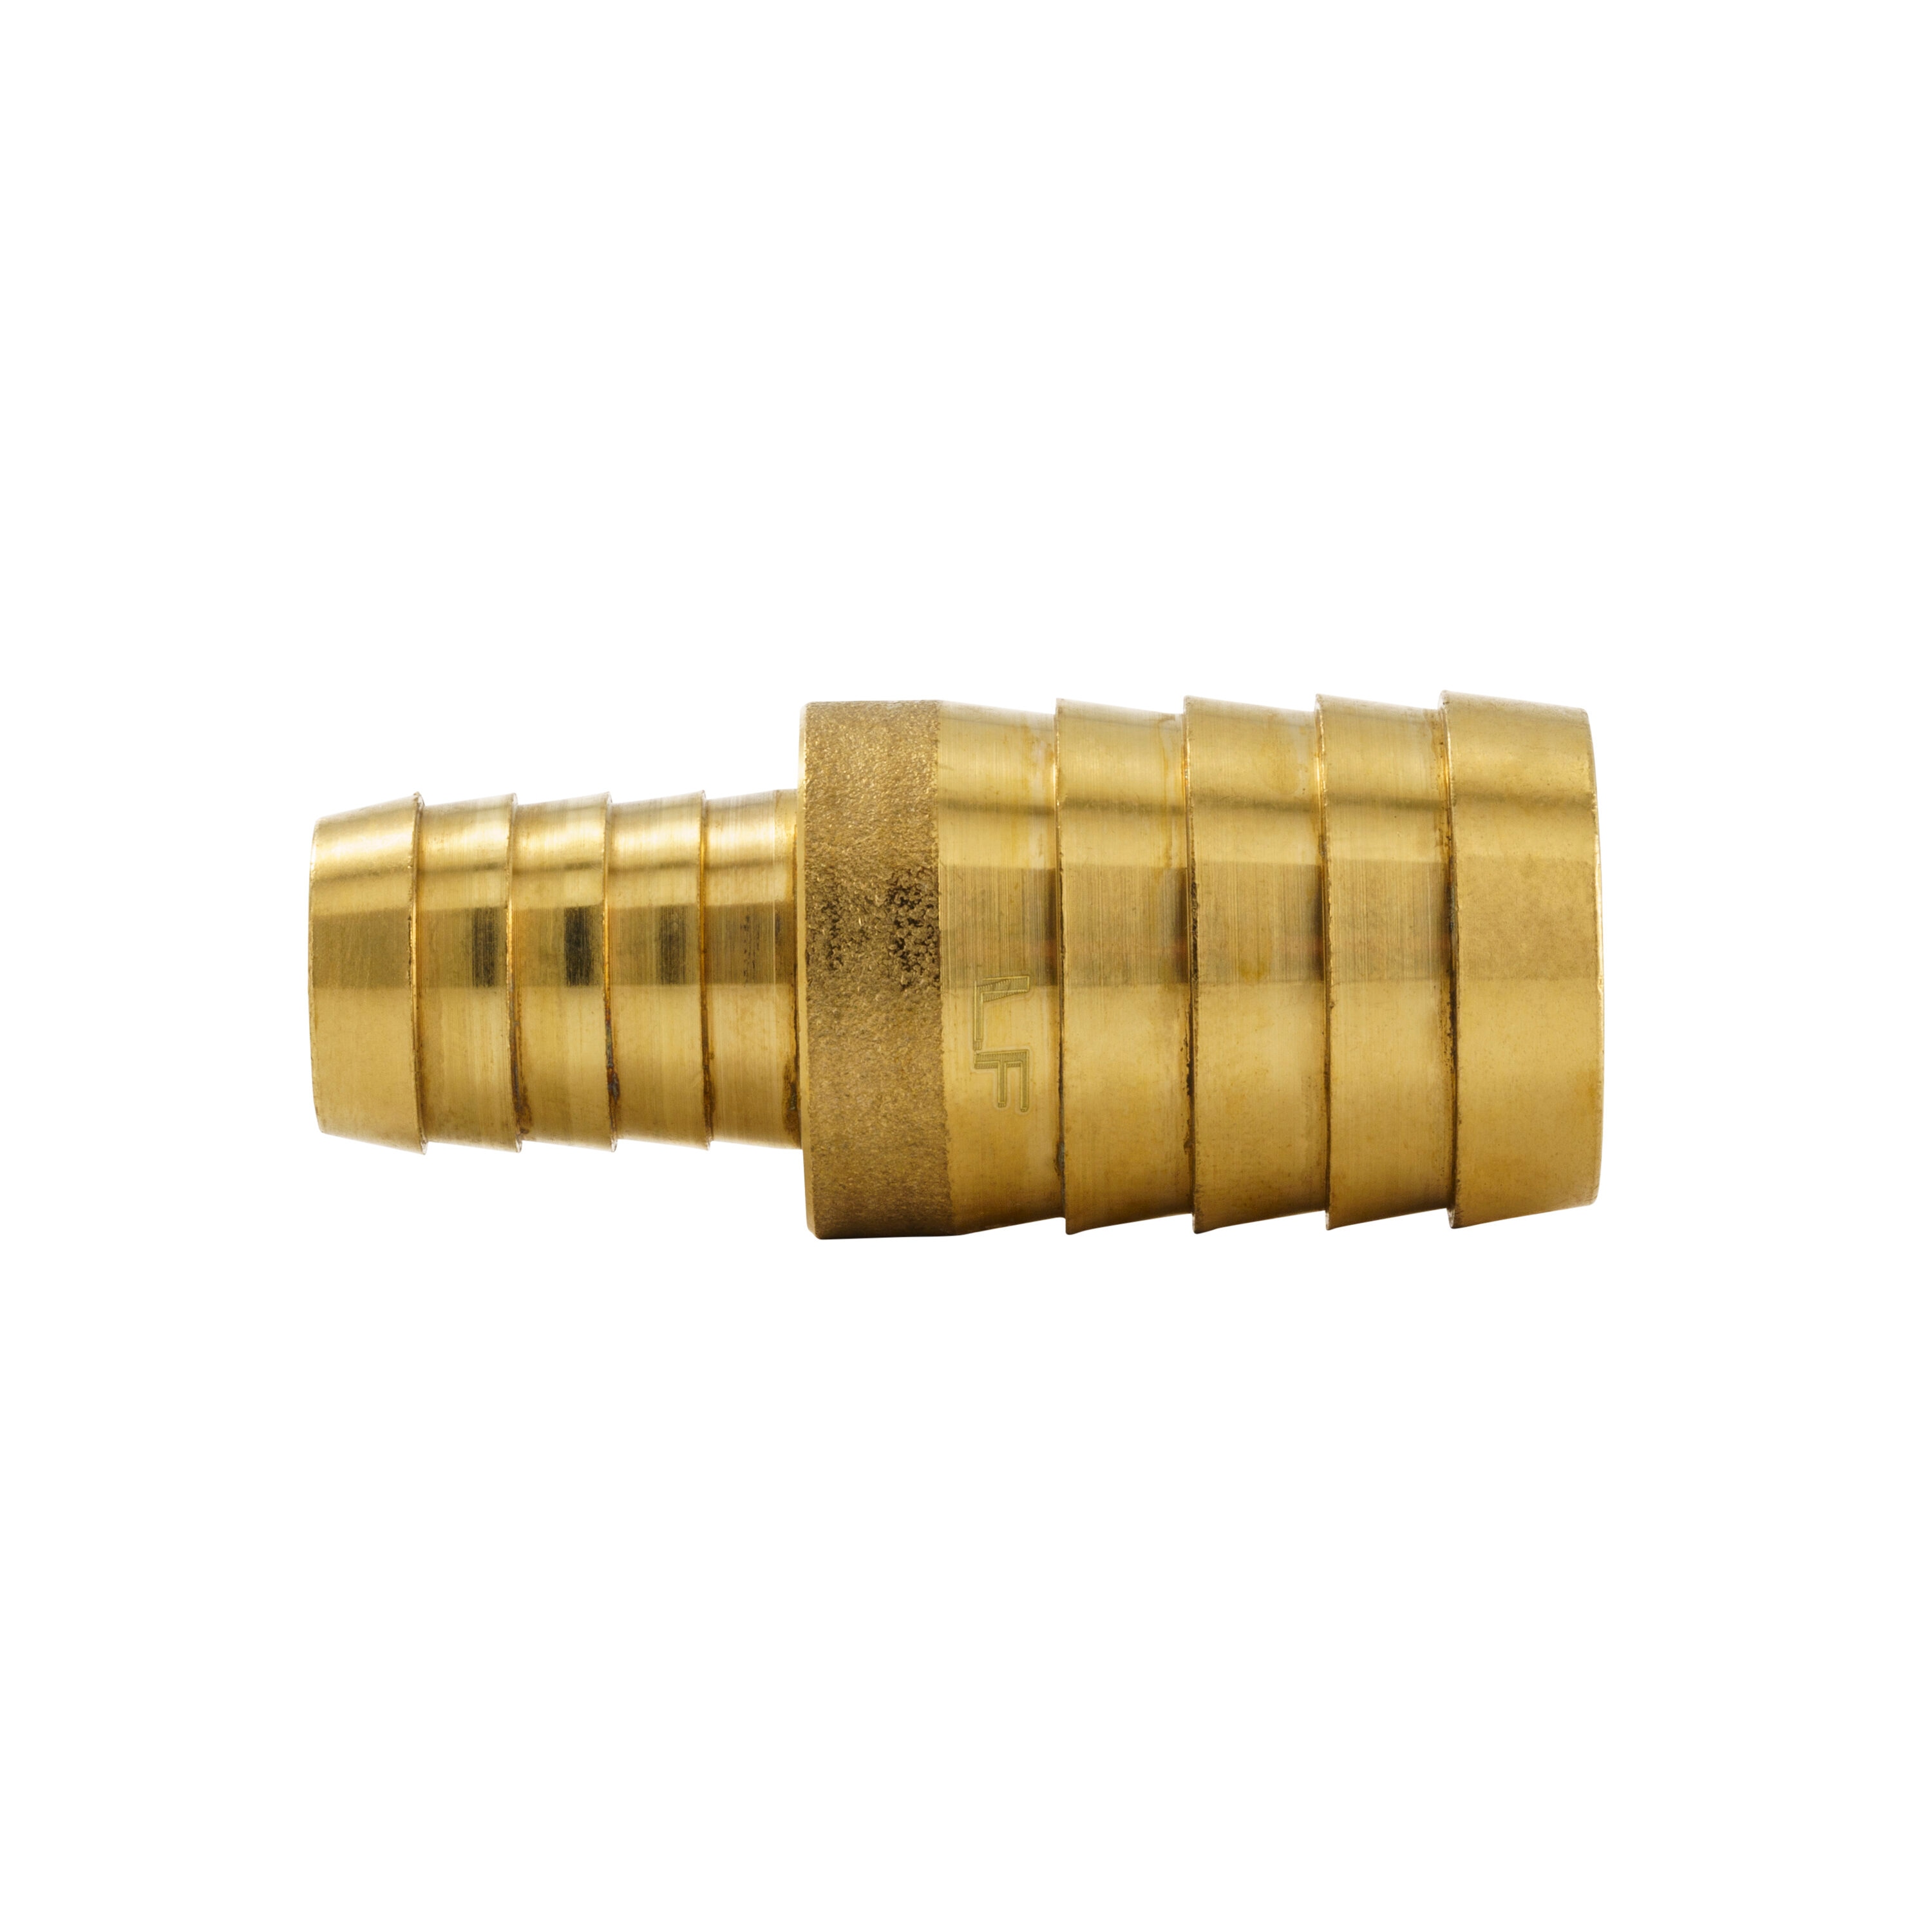 Beduan Brass Hose Barb Reducer, 3/4 to 1/2 Barb Hose ID, Reducing Barb  Brabed Fitting Splicer Mender Union Air Water Fuel